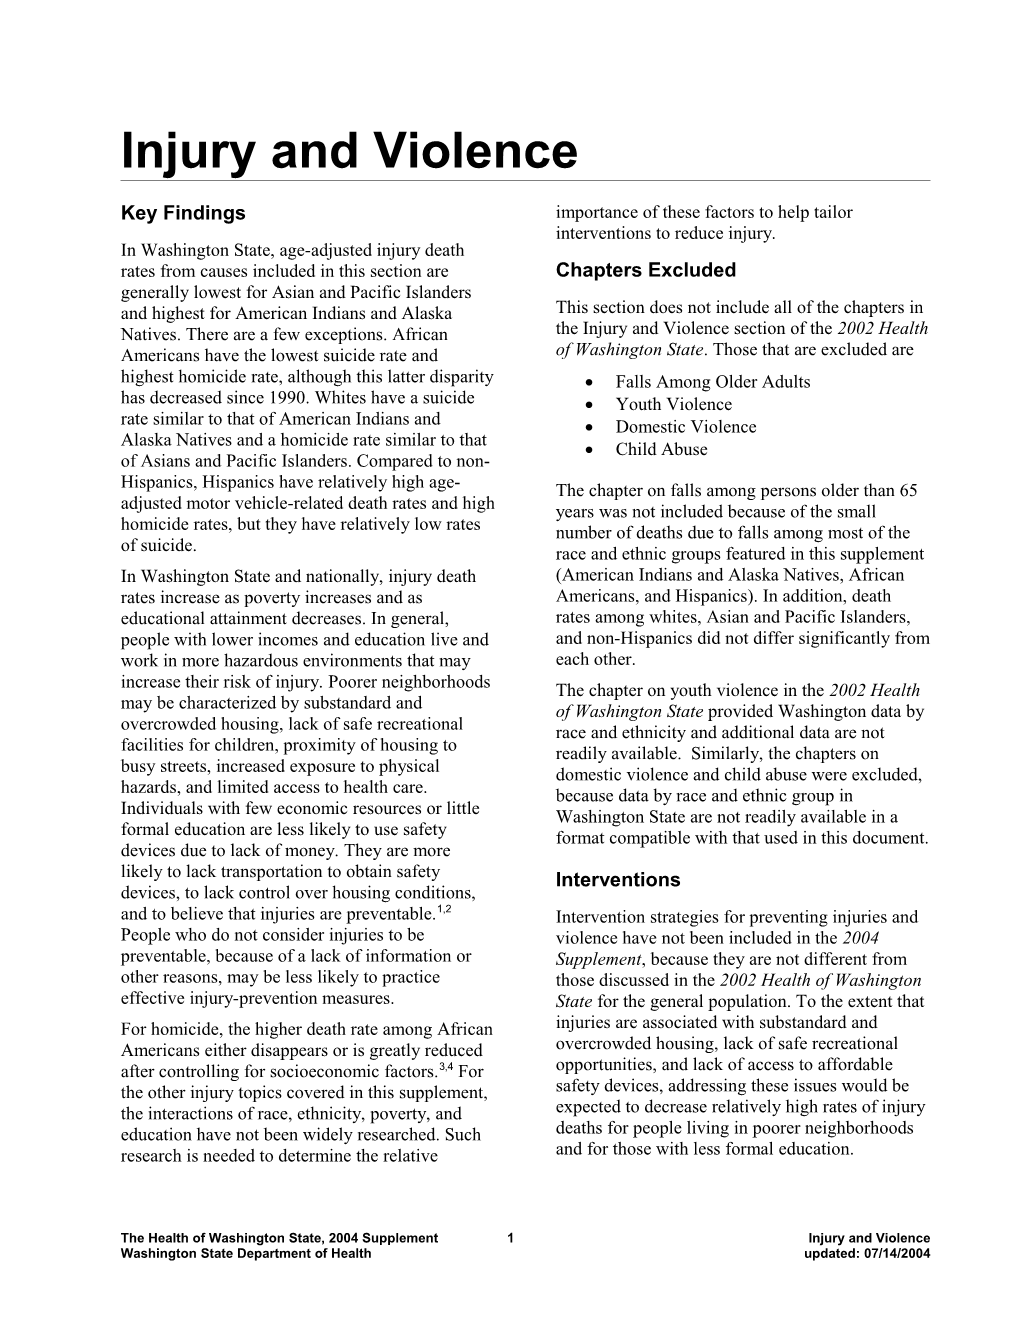 Injury and Violence - Section Overview - 2004